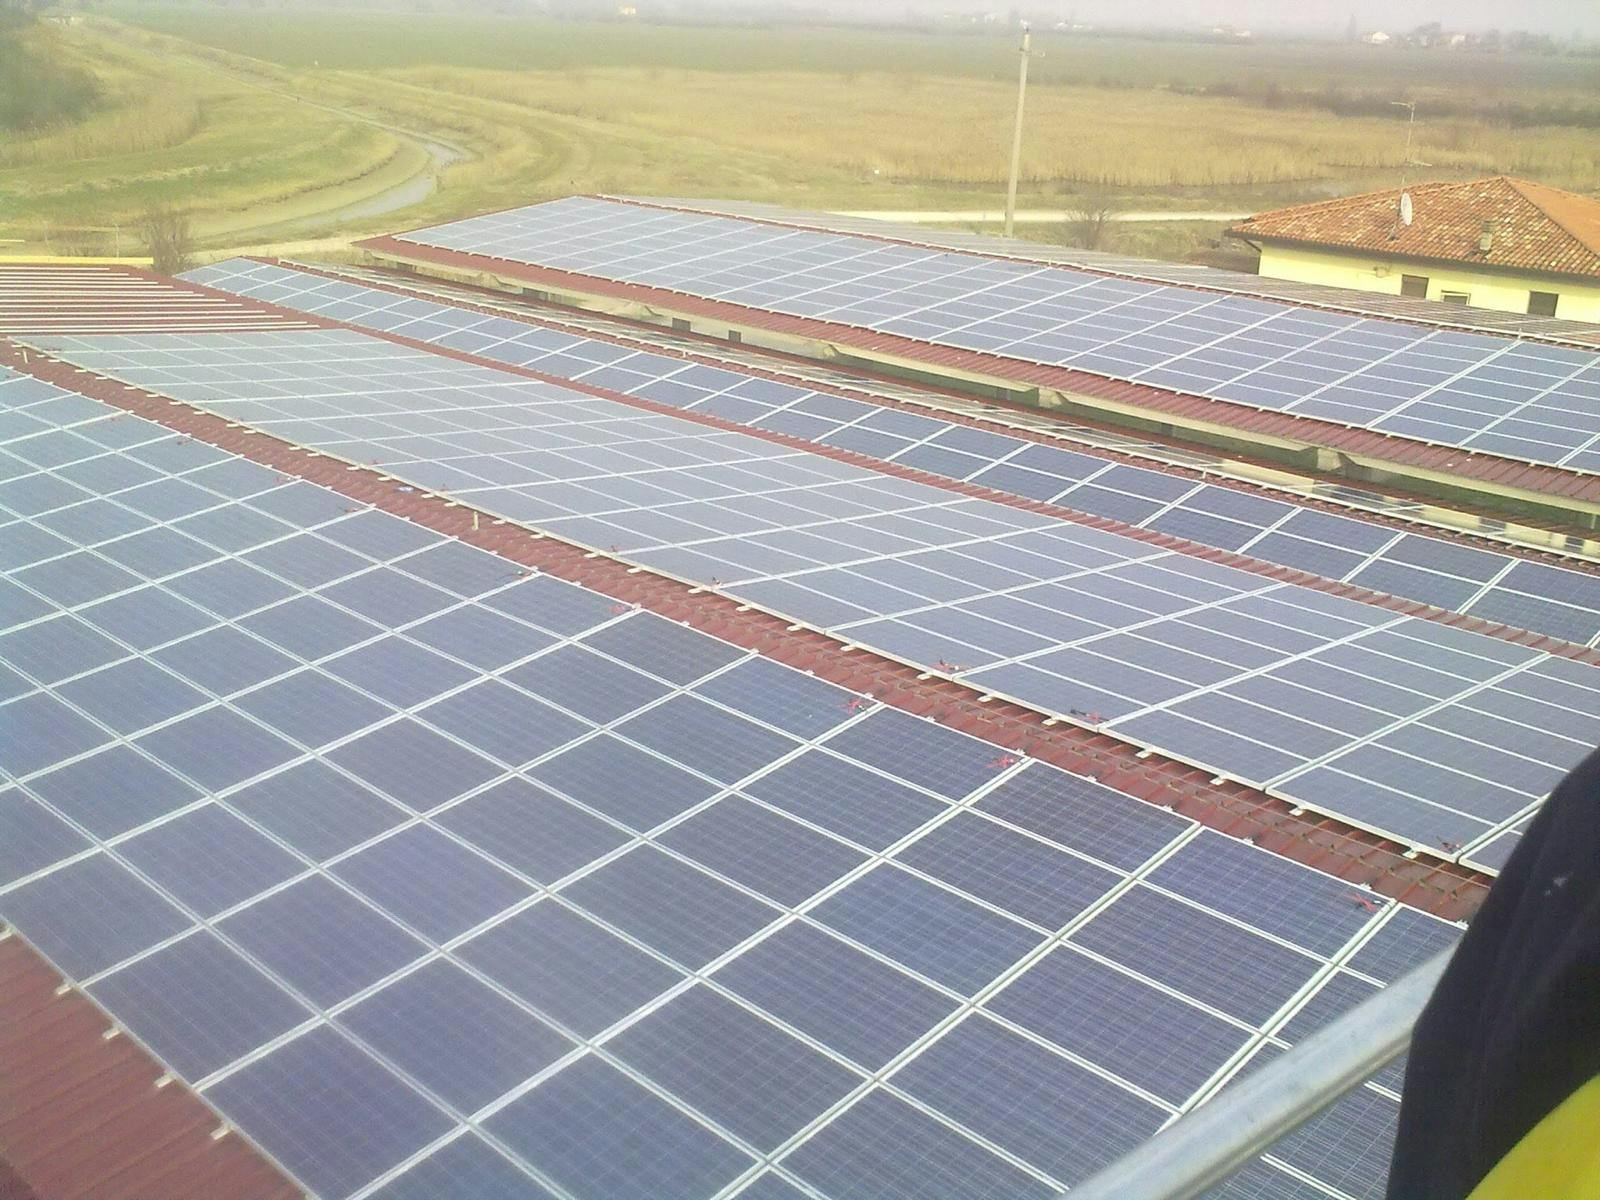 Installation of photovoltaic panels